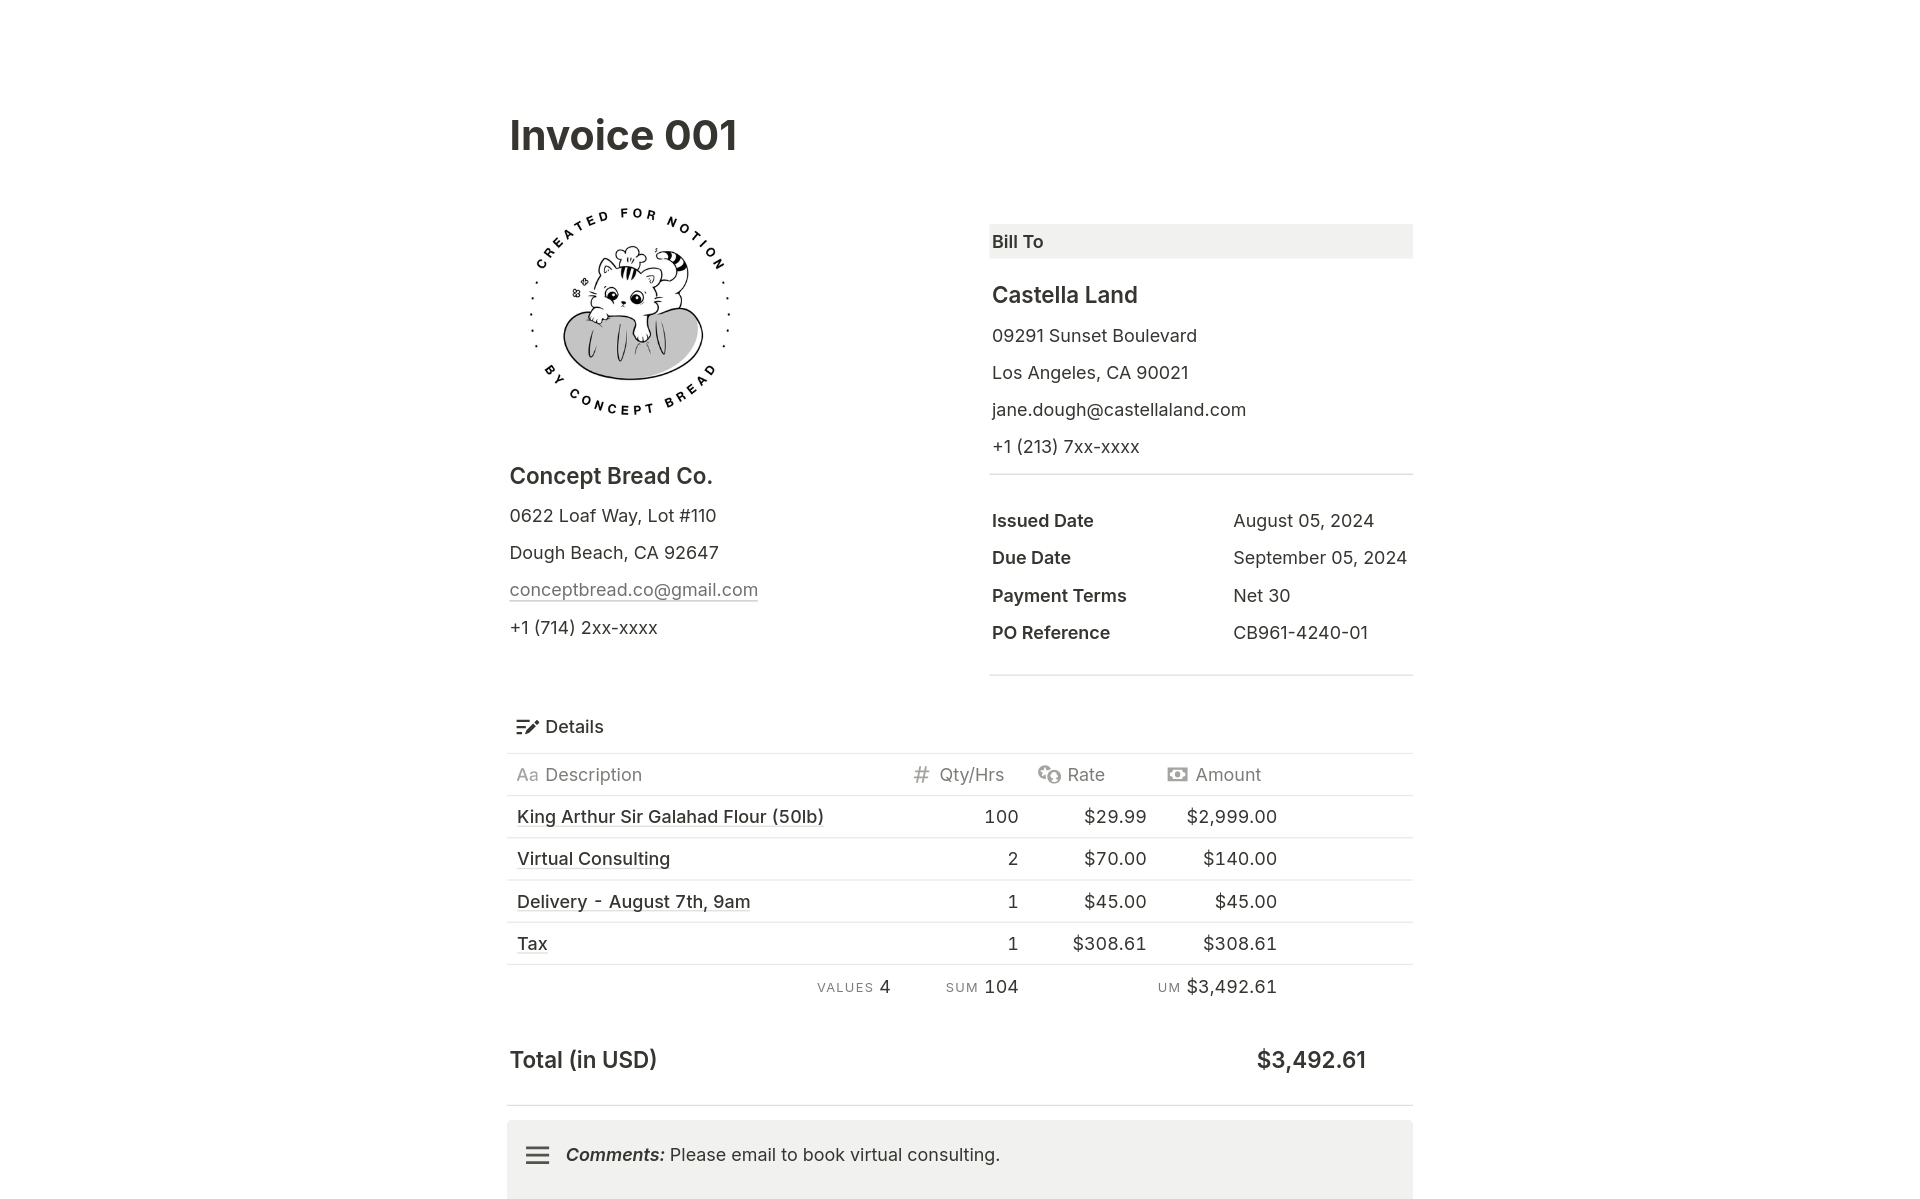 Quickly generate and send invoices to your recipients!